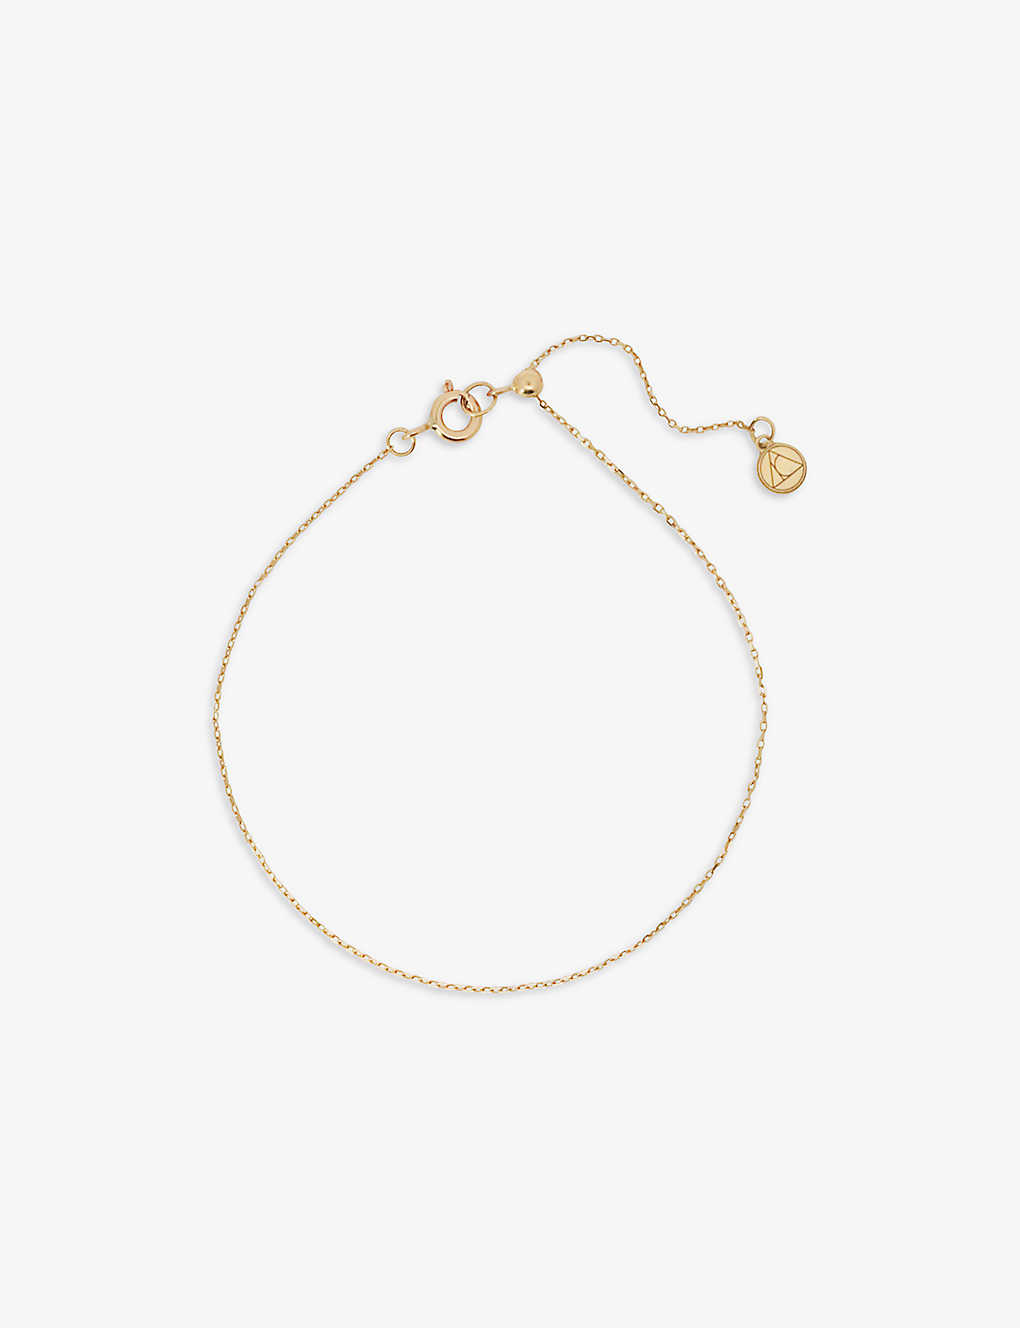 The Alkemistry Womens Yellow Gold Nude Shimmer 18ct Recycled Yellow-gold Adjustable Chain Bracelet